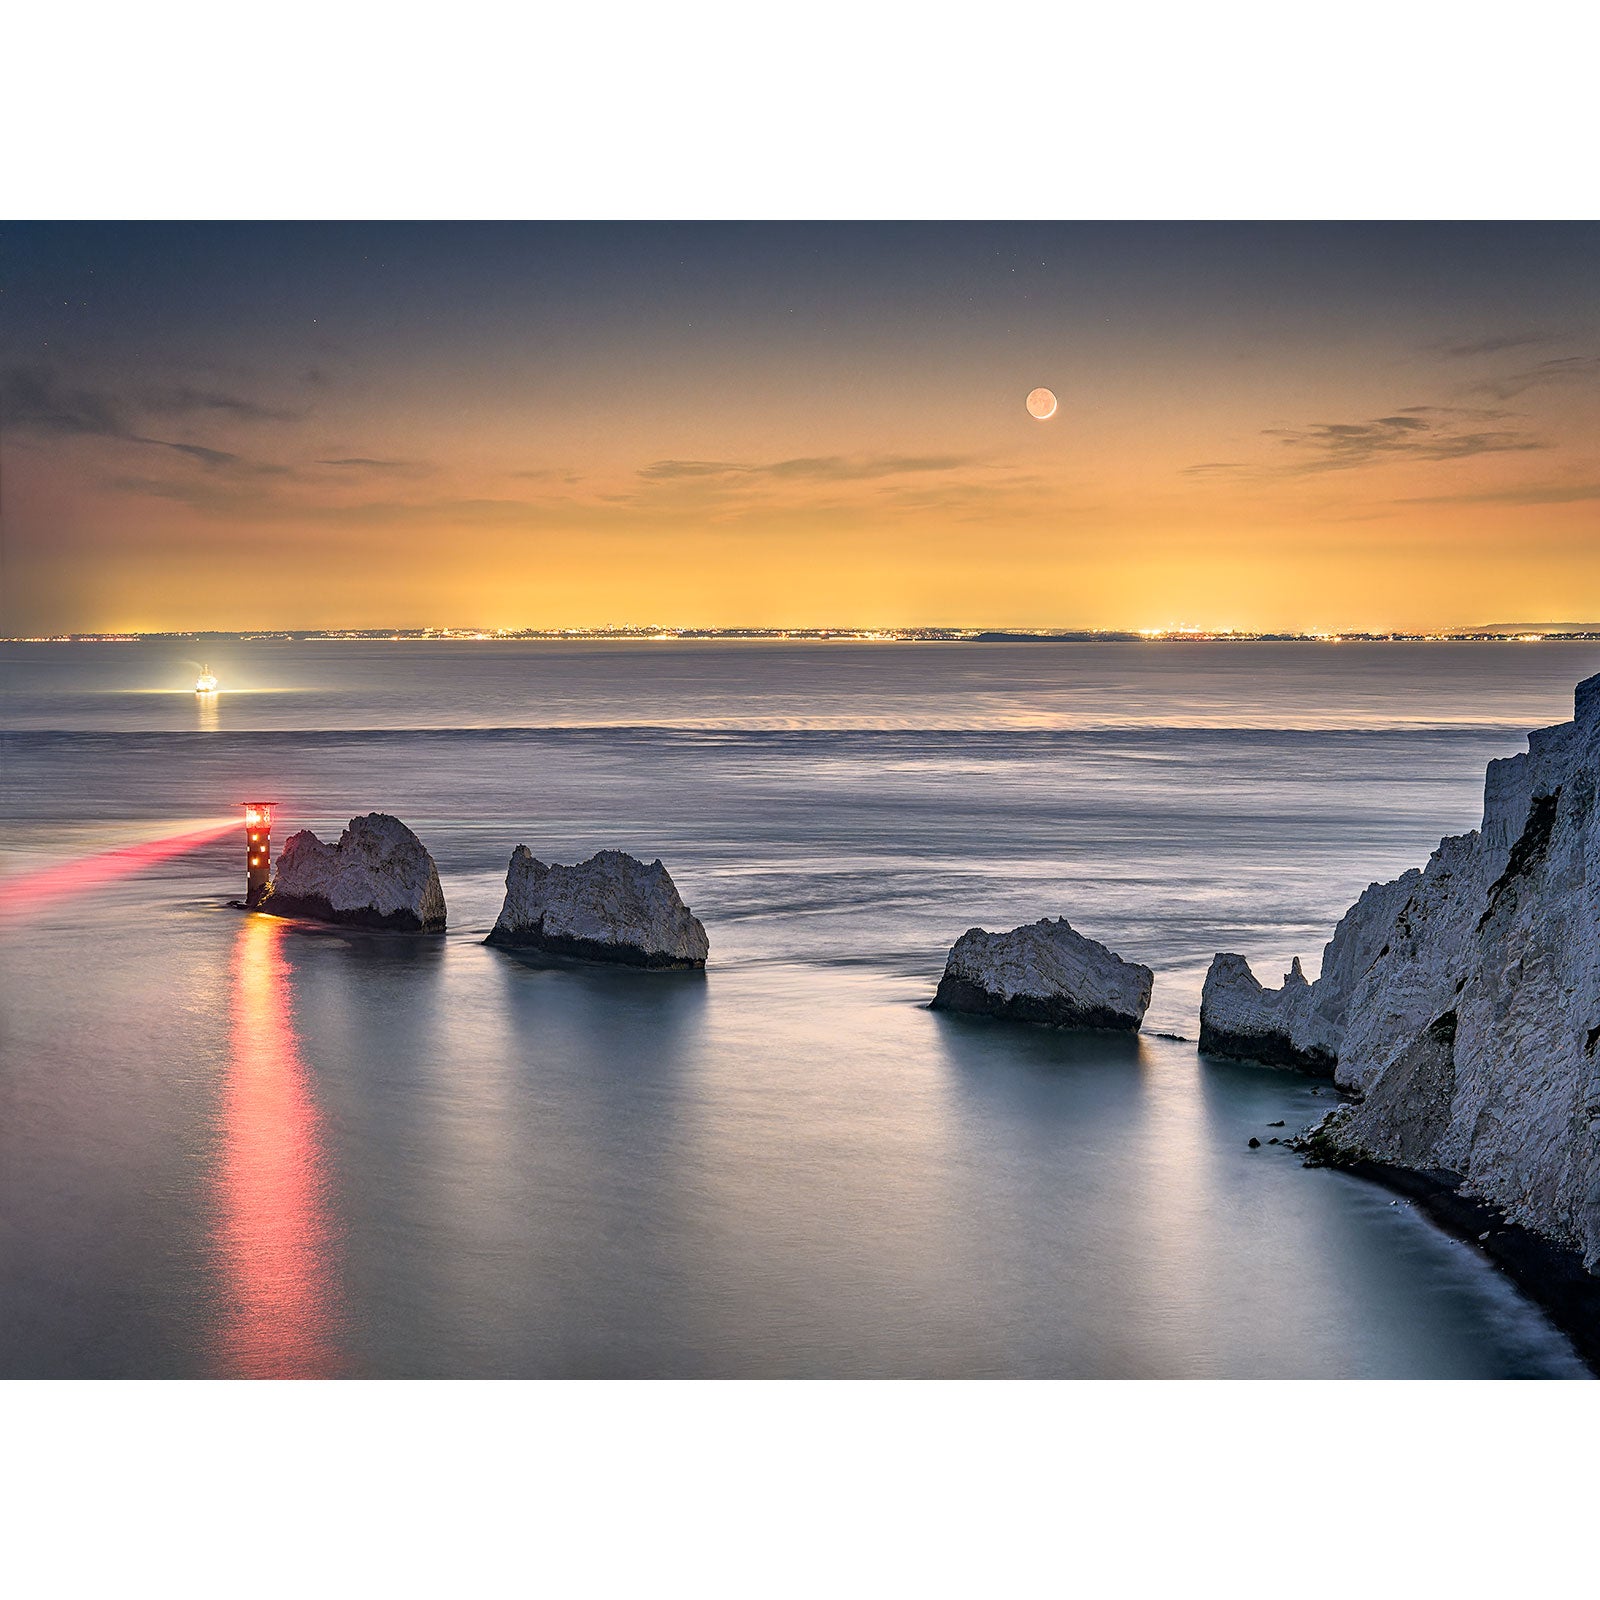 Seascape at twilight with a lighthouse beam and Moonset over The Needles and moon over calm waters and chalk cliffs of Wight by Available Light Photography.